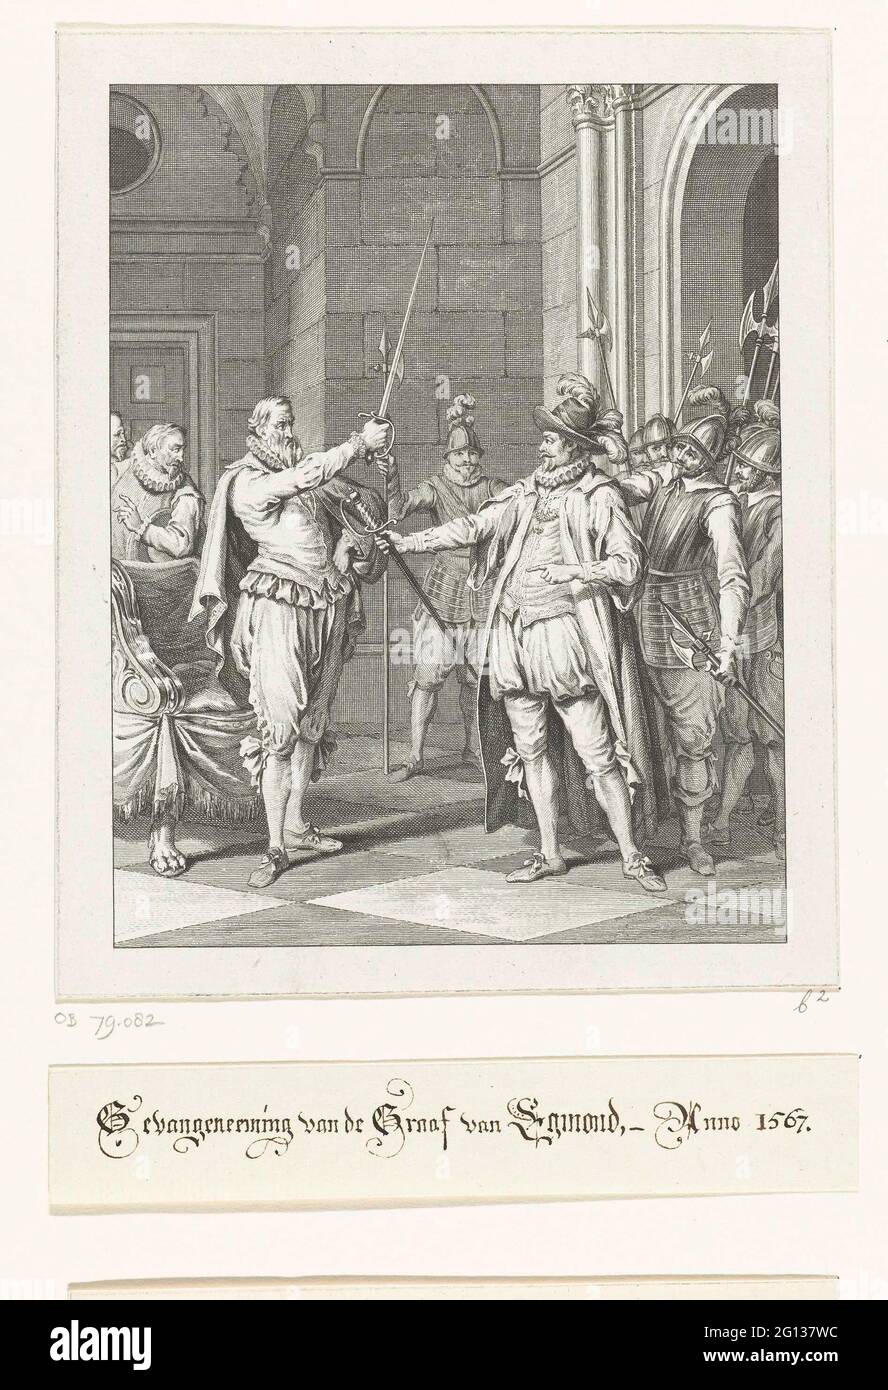 Egmond gives his degen to Alva, 1567; Prison of the Count of Egmond, Anno 1567; Scenes from the life of Prince Willem I, 1568-1584. In his arrest, the count of Egmond hands his sword to Alva, September 10, 1567. Second vocals. Stock Photo